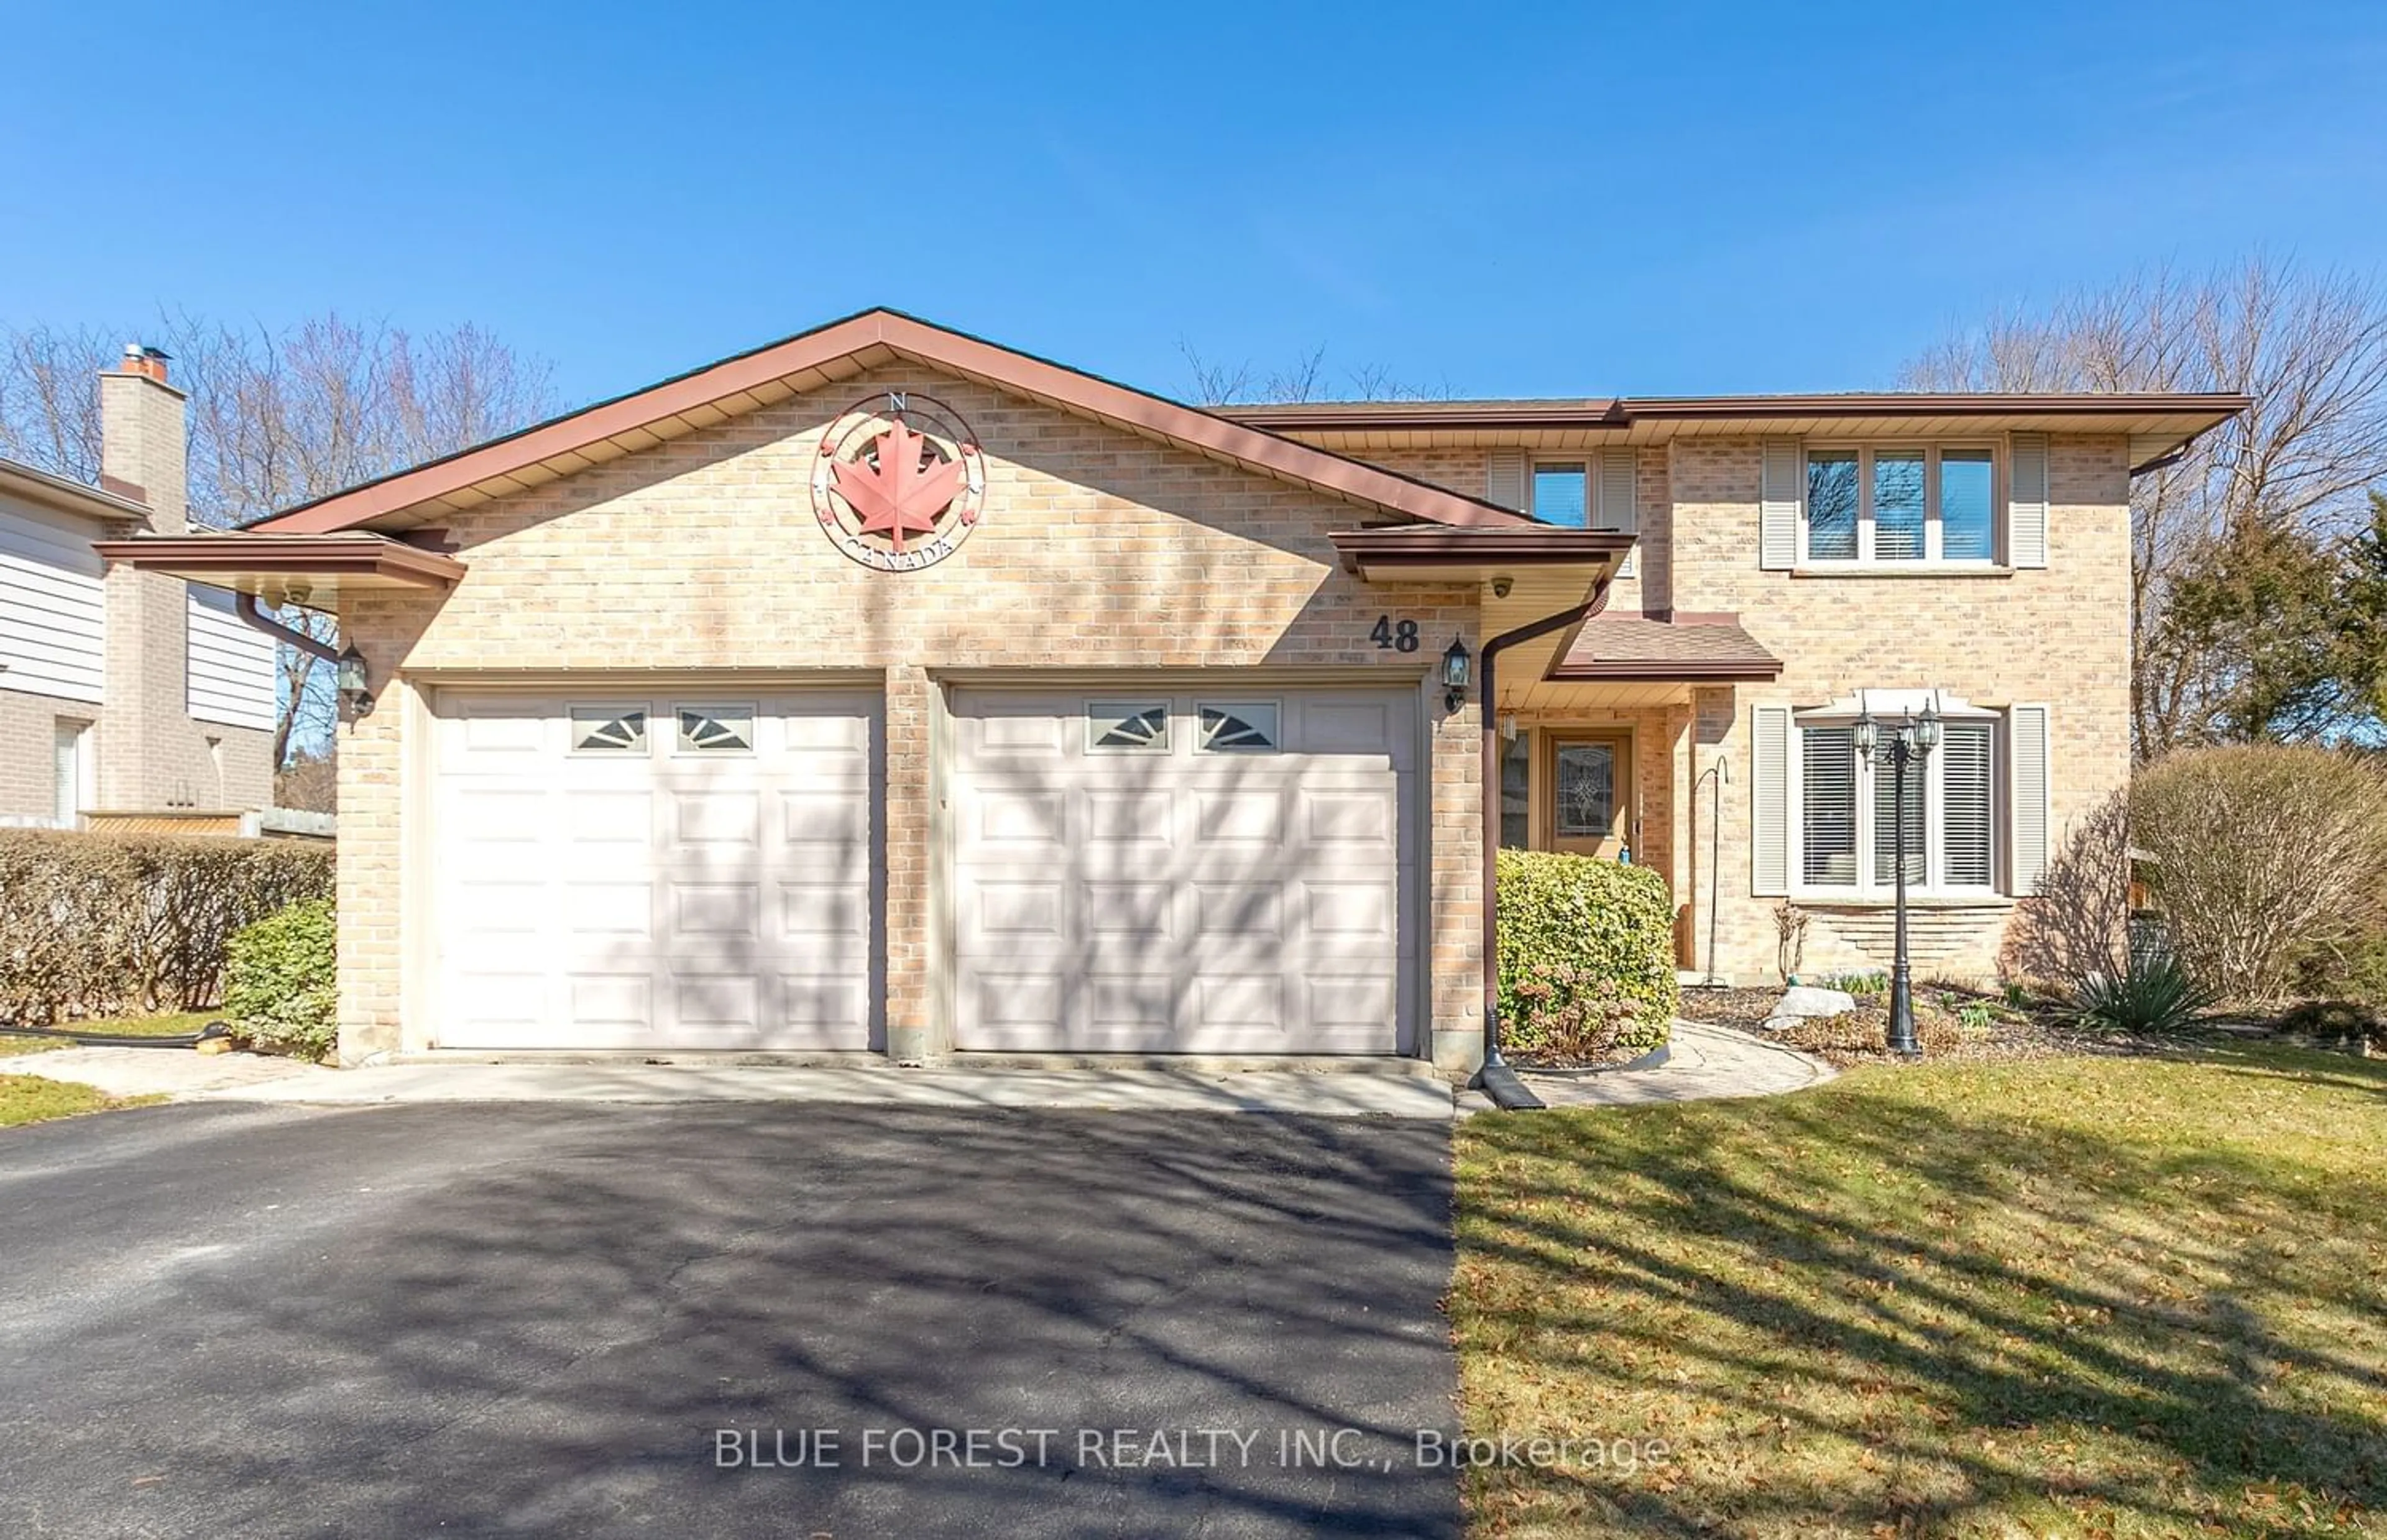 Frontside or backside of a home for 48 Walmer Gdns, London Ontario N6G 4H6